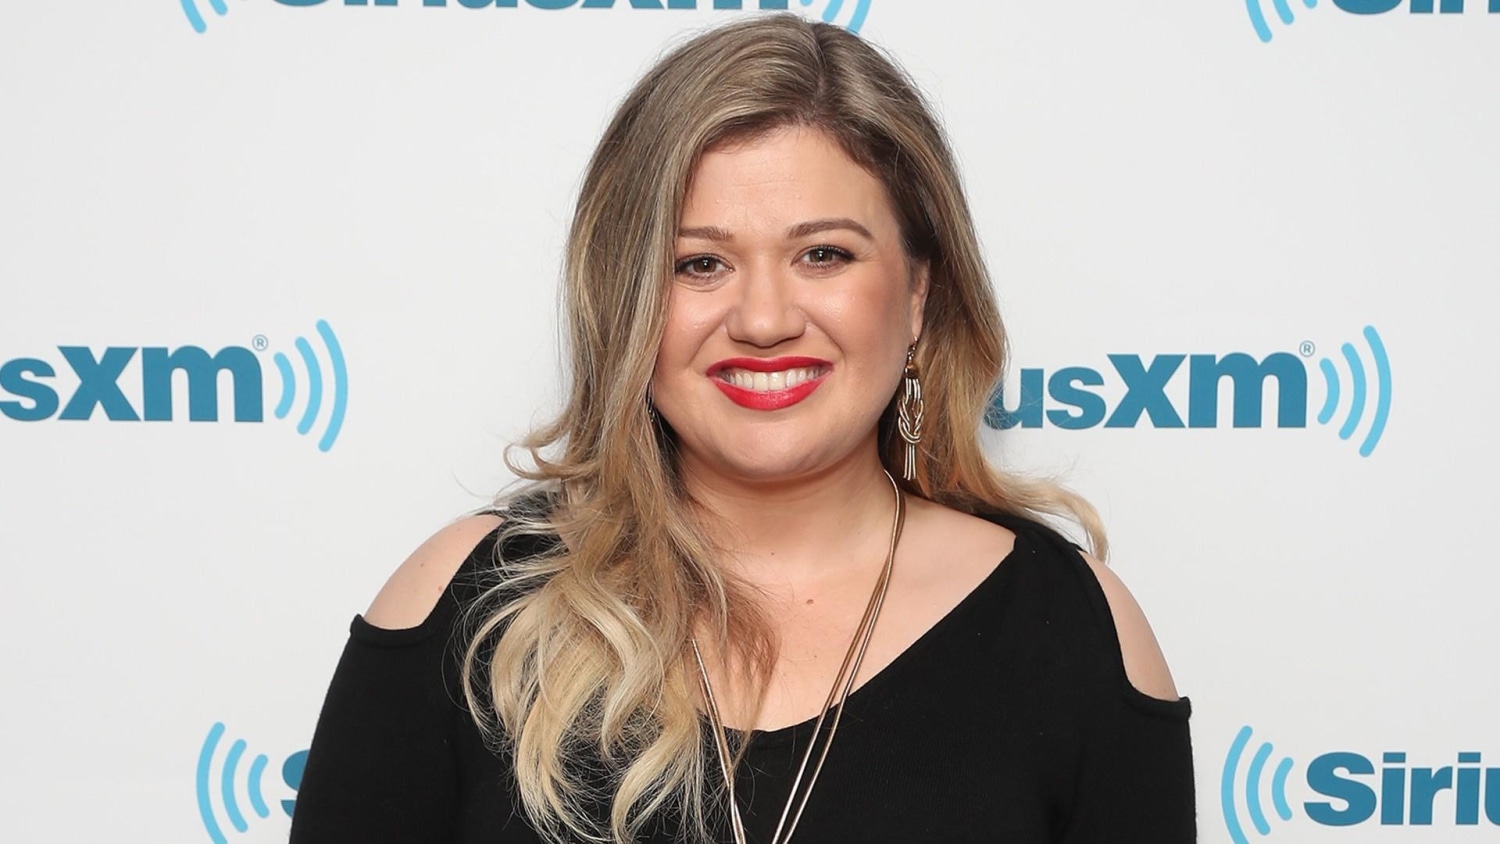 Kelly Clarkson speaks out about the pressure to be really skinny pic